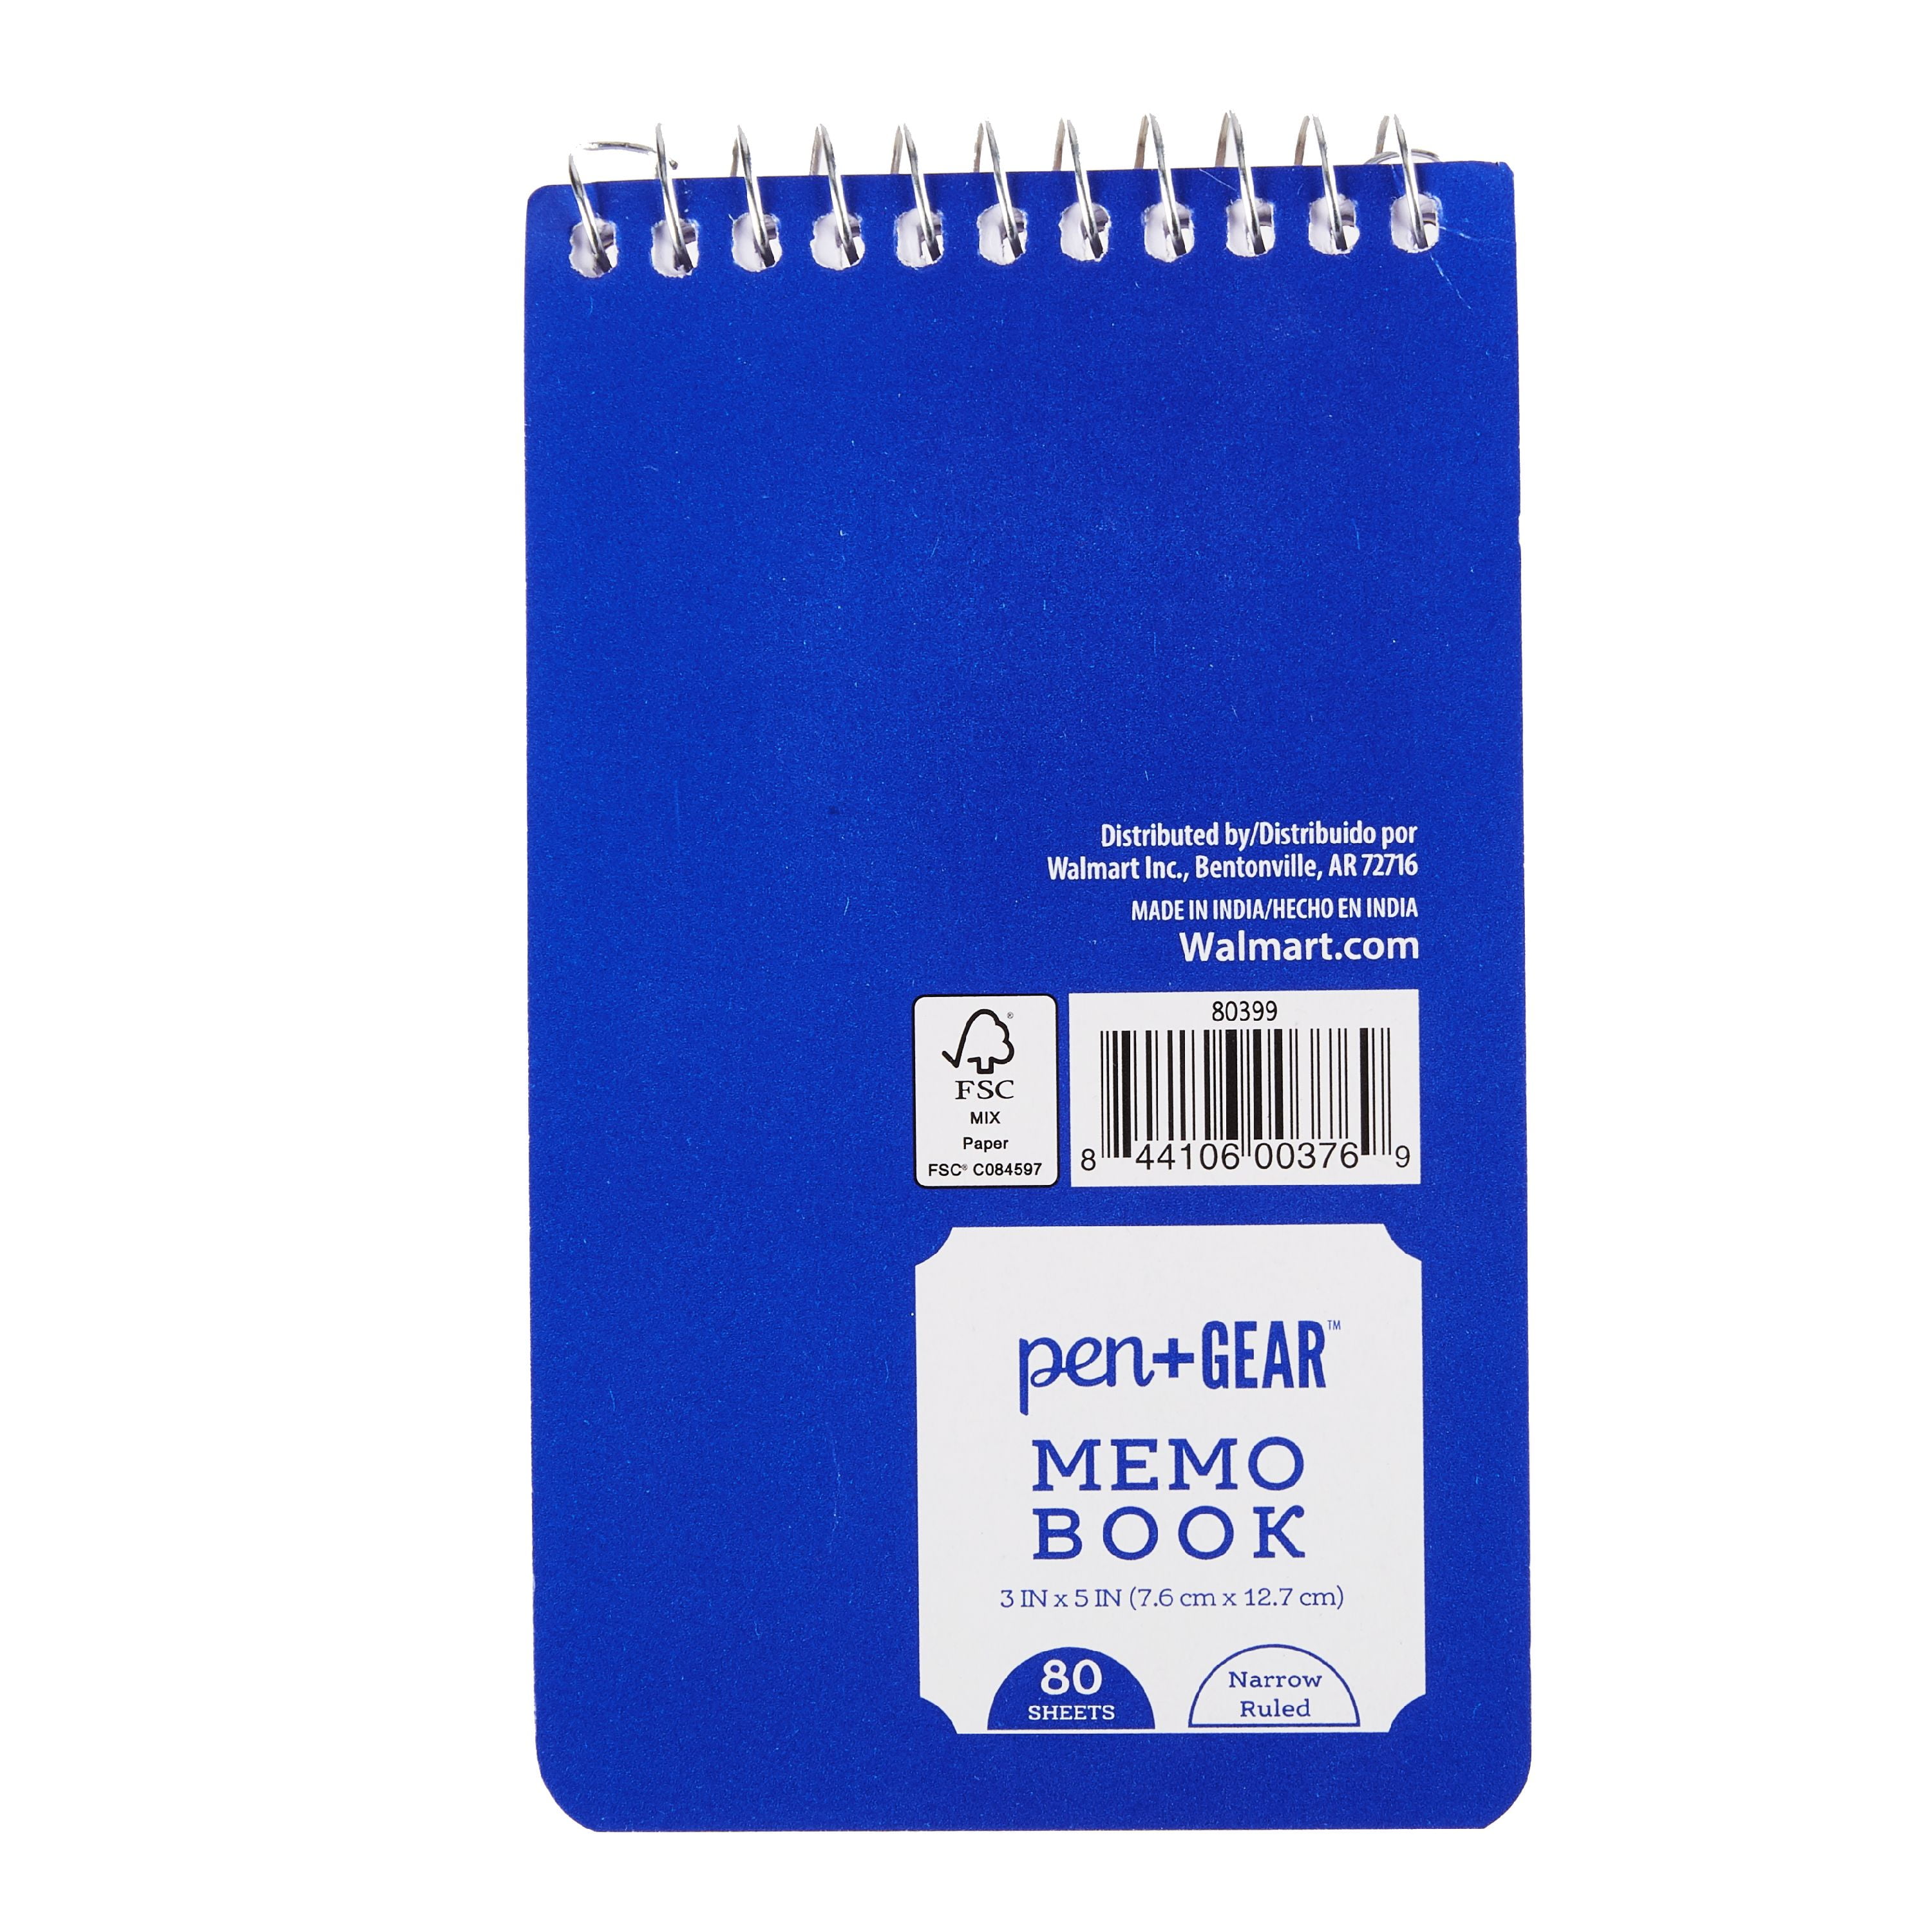 Pen + Gear Spiral Bound Ruled Paper Memo Book, 3 in x 5 in, 4 Pack, 80 Sheets Each